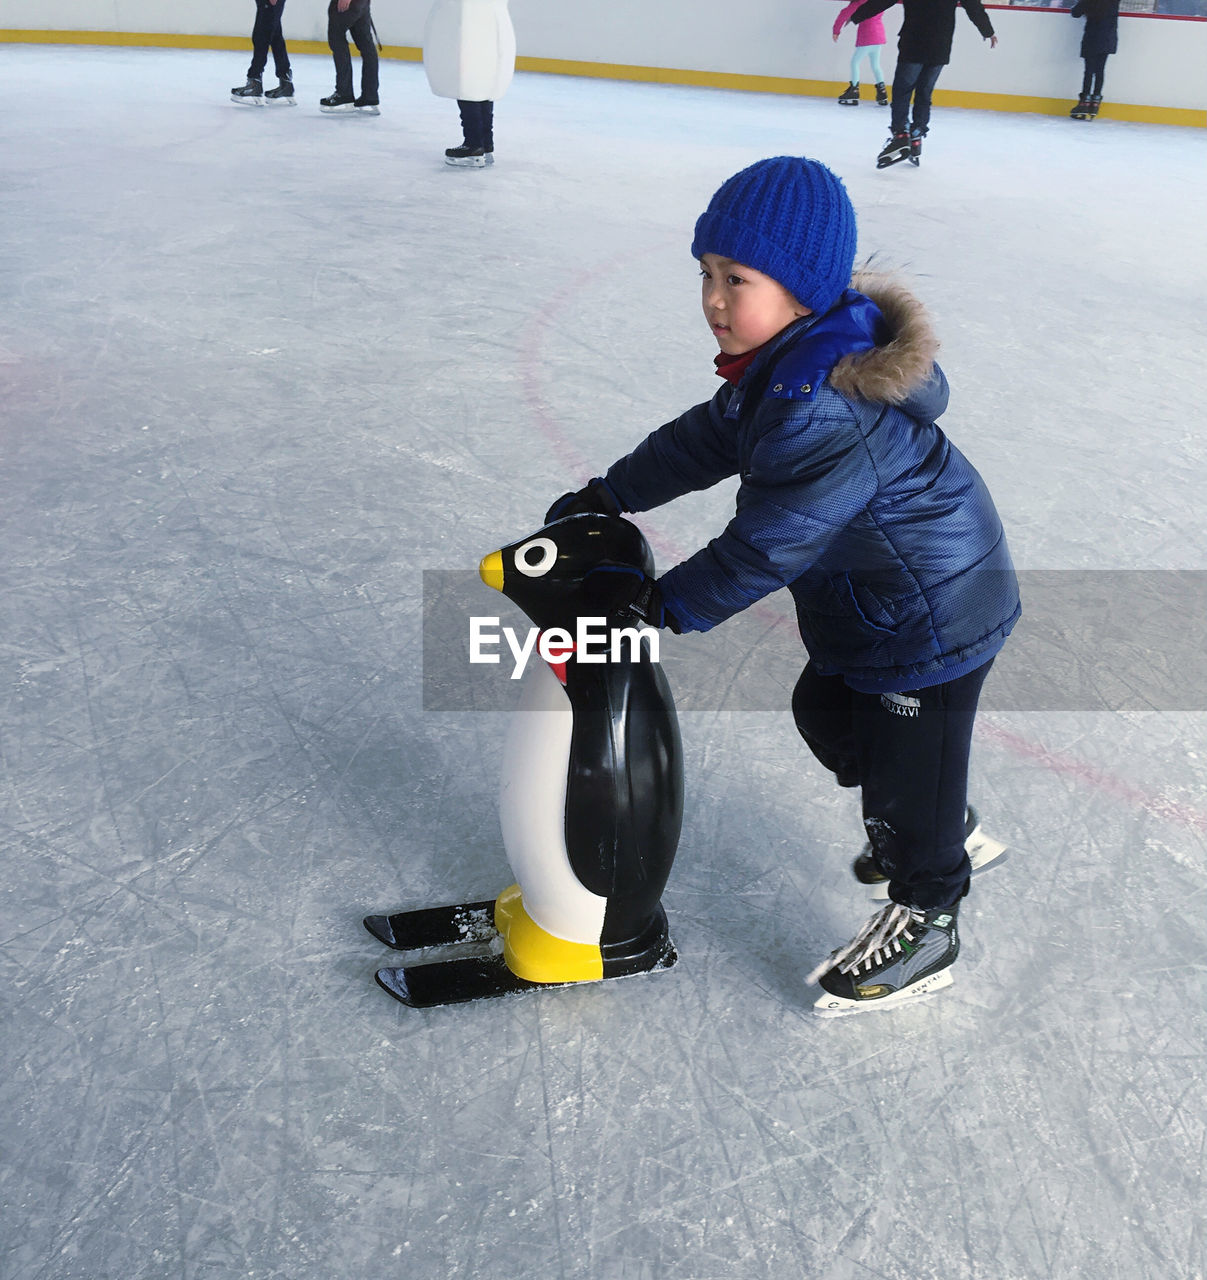 Boy learning ice skating with penguin